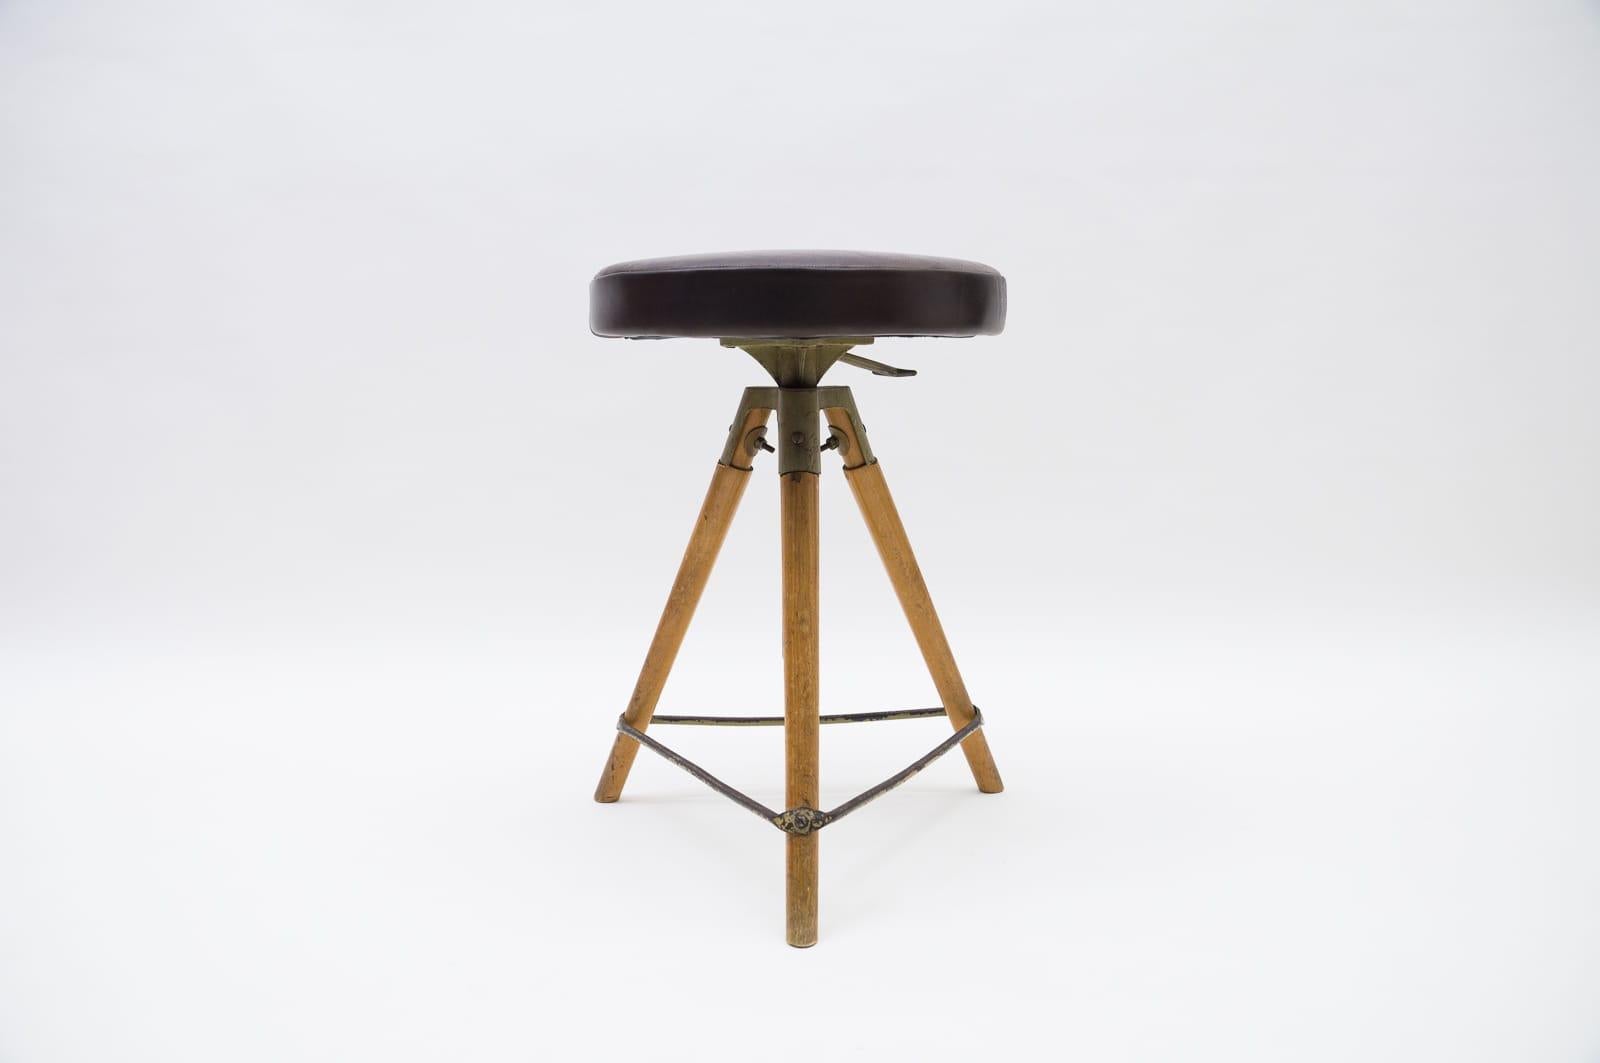 Mid-Century Modern adjustable Swiss stool in leather metal and wood, 1940s/50s.

New upholstery in old neck leather.

Measures: Adjustable from 56cm to 72cm. Seat diameter 39.5cm.

Very decorative, very rare.